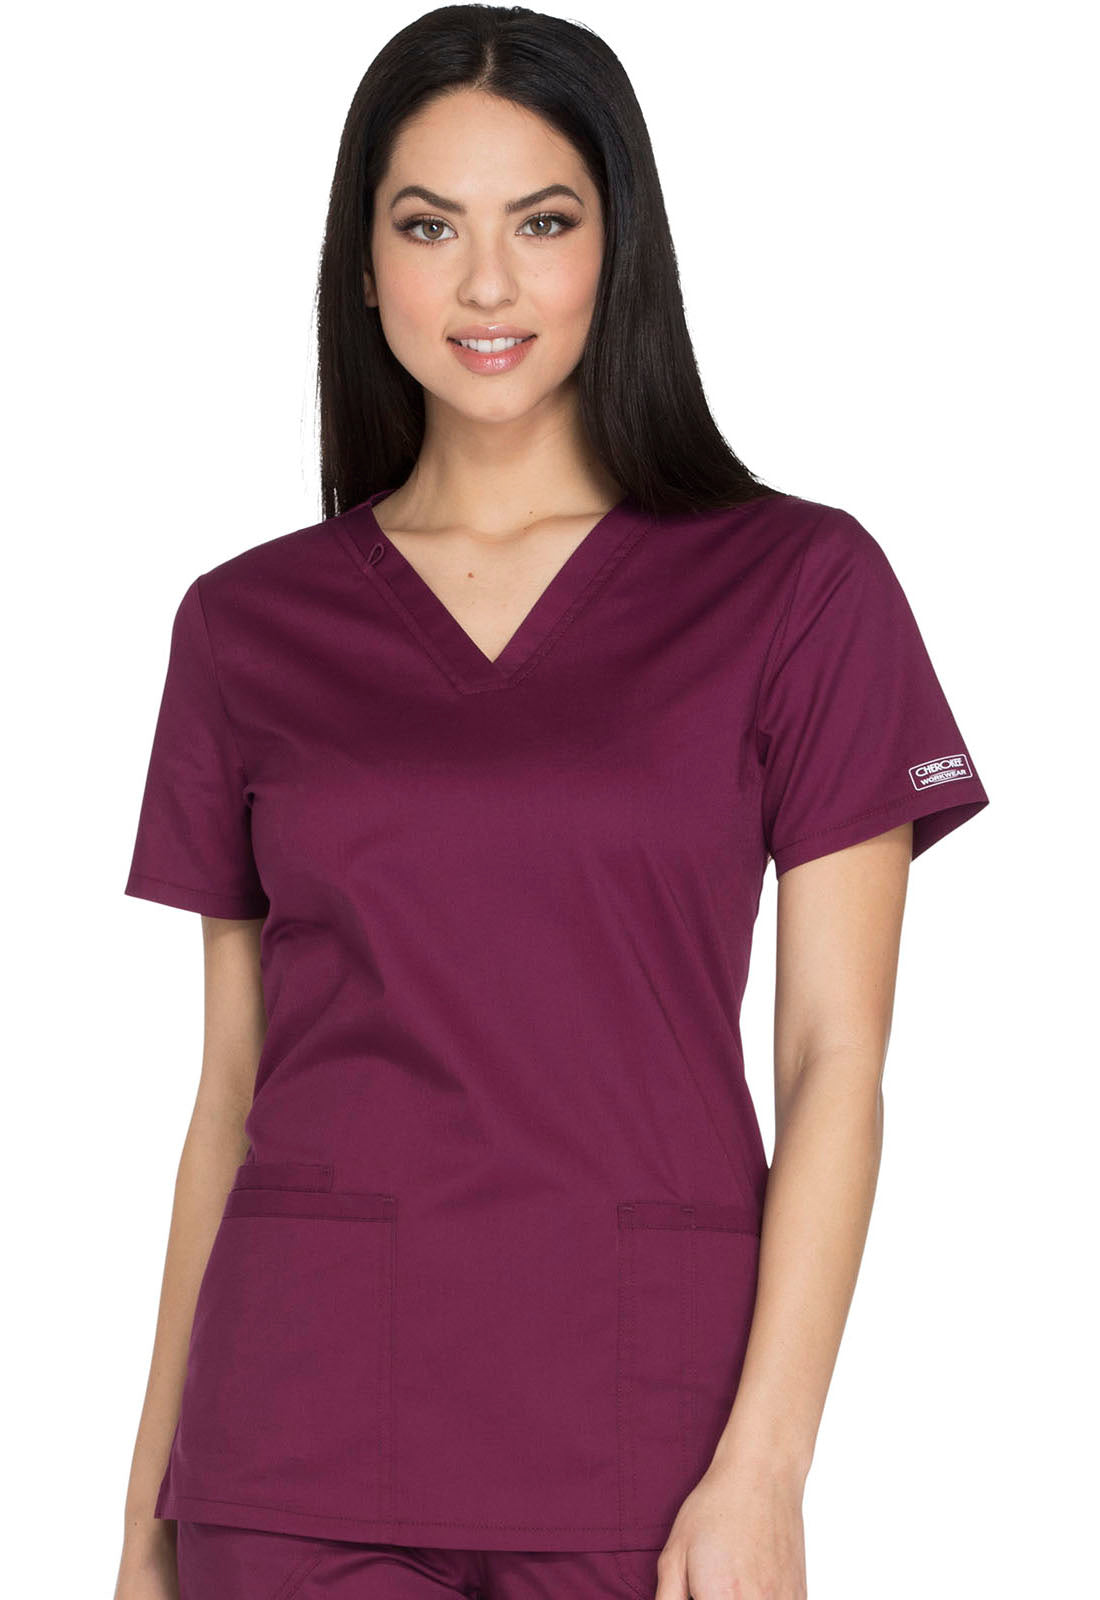 Heal Wear Heal + Wear Women Scrubs Top V-Neck Short Sleeve Female Medical with Pockets Regular Fit 4 Way Stretch Wine S, Adult Unisex, Size: Small